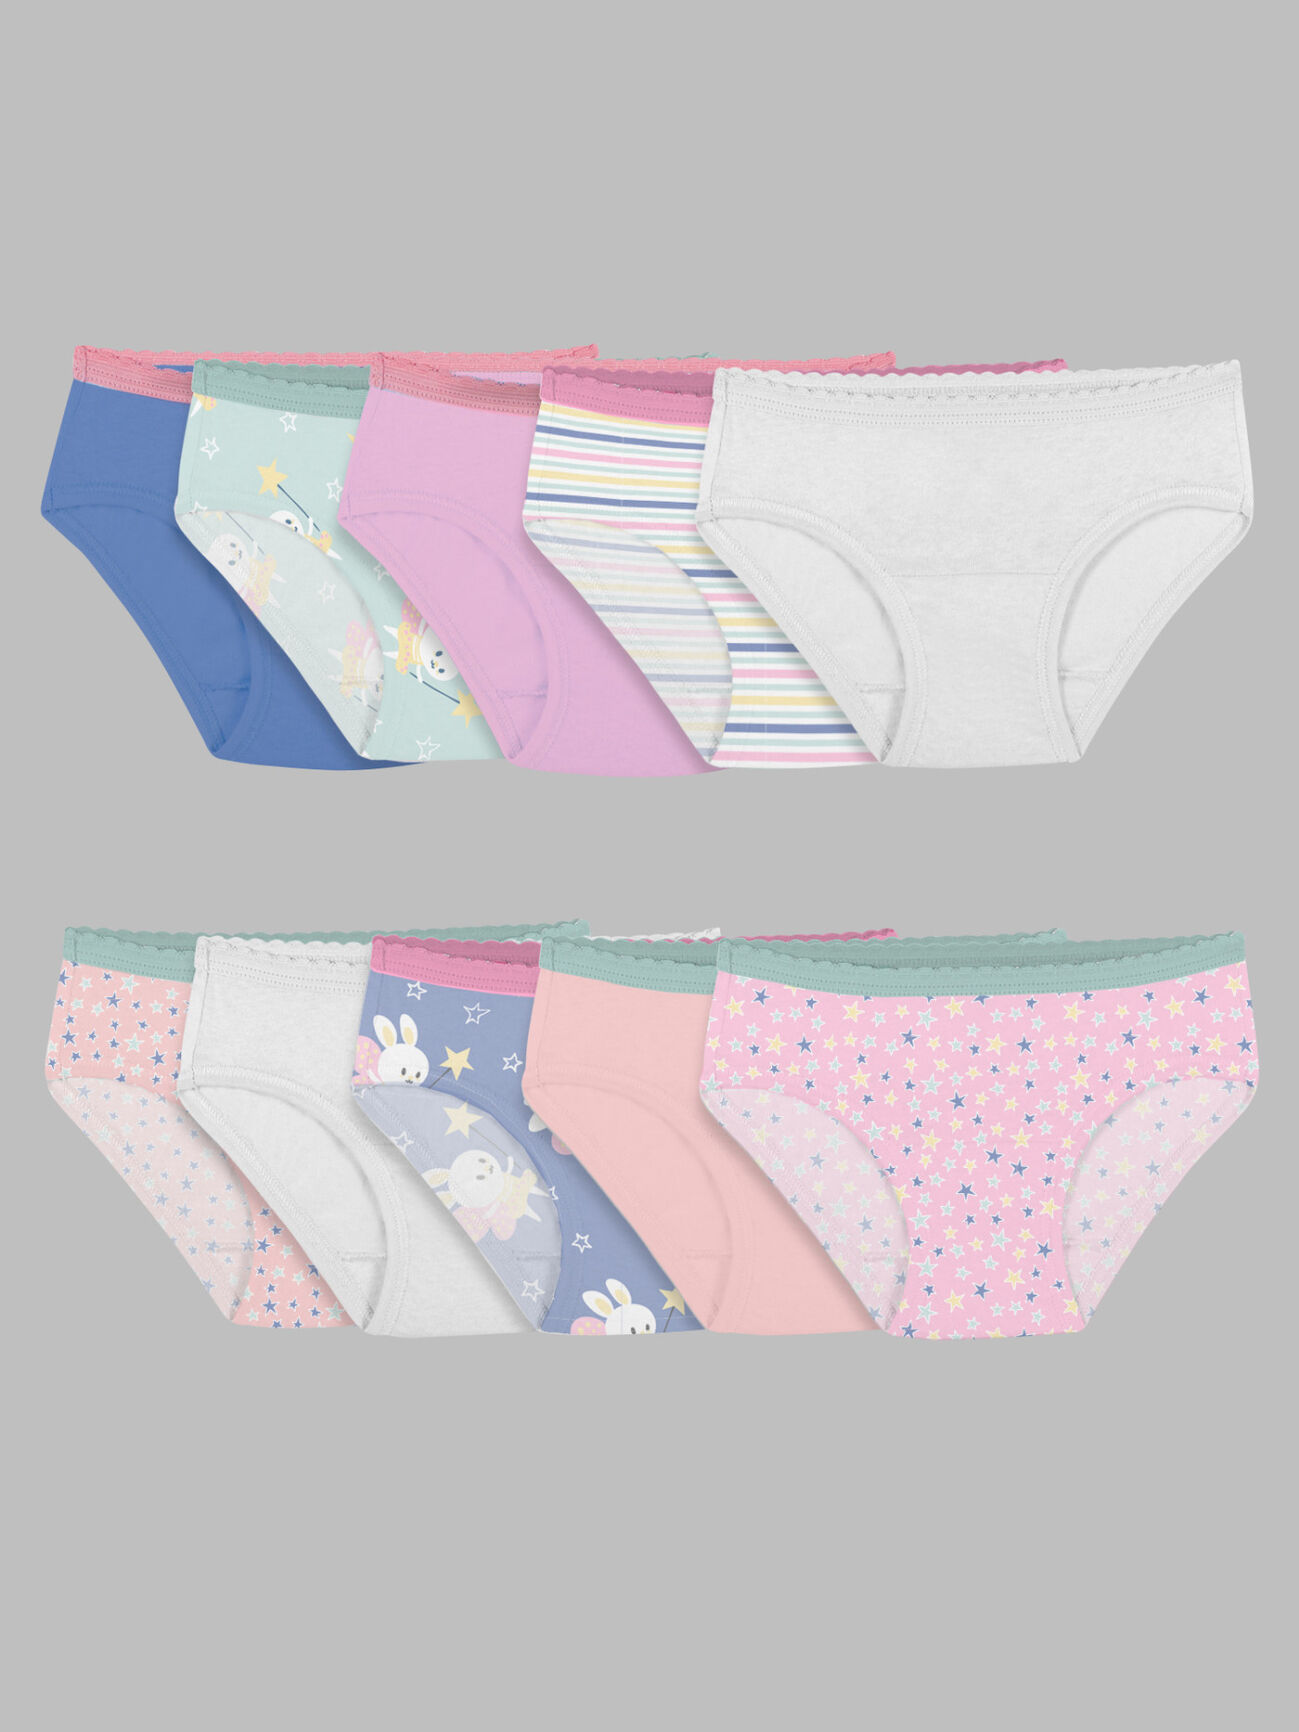 Fruit of the Loom Toddler Girls 10 Pack Assorted Cotton Brief Underwear,  4T/5T, 